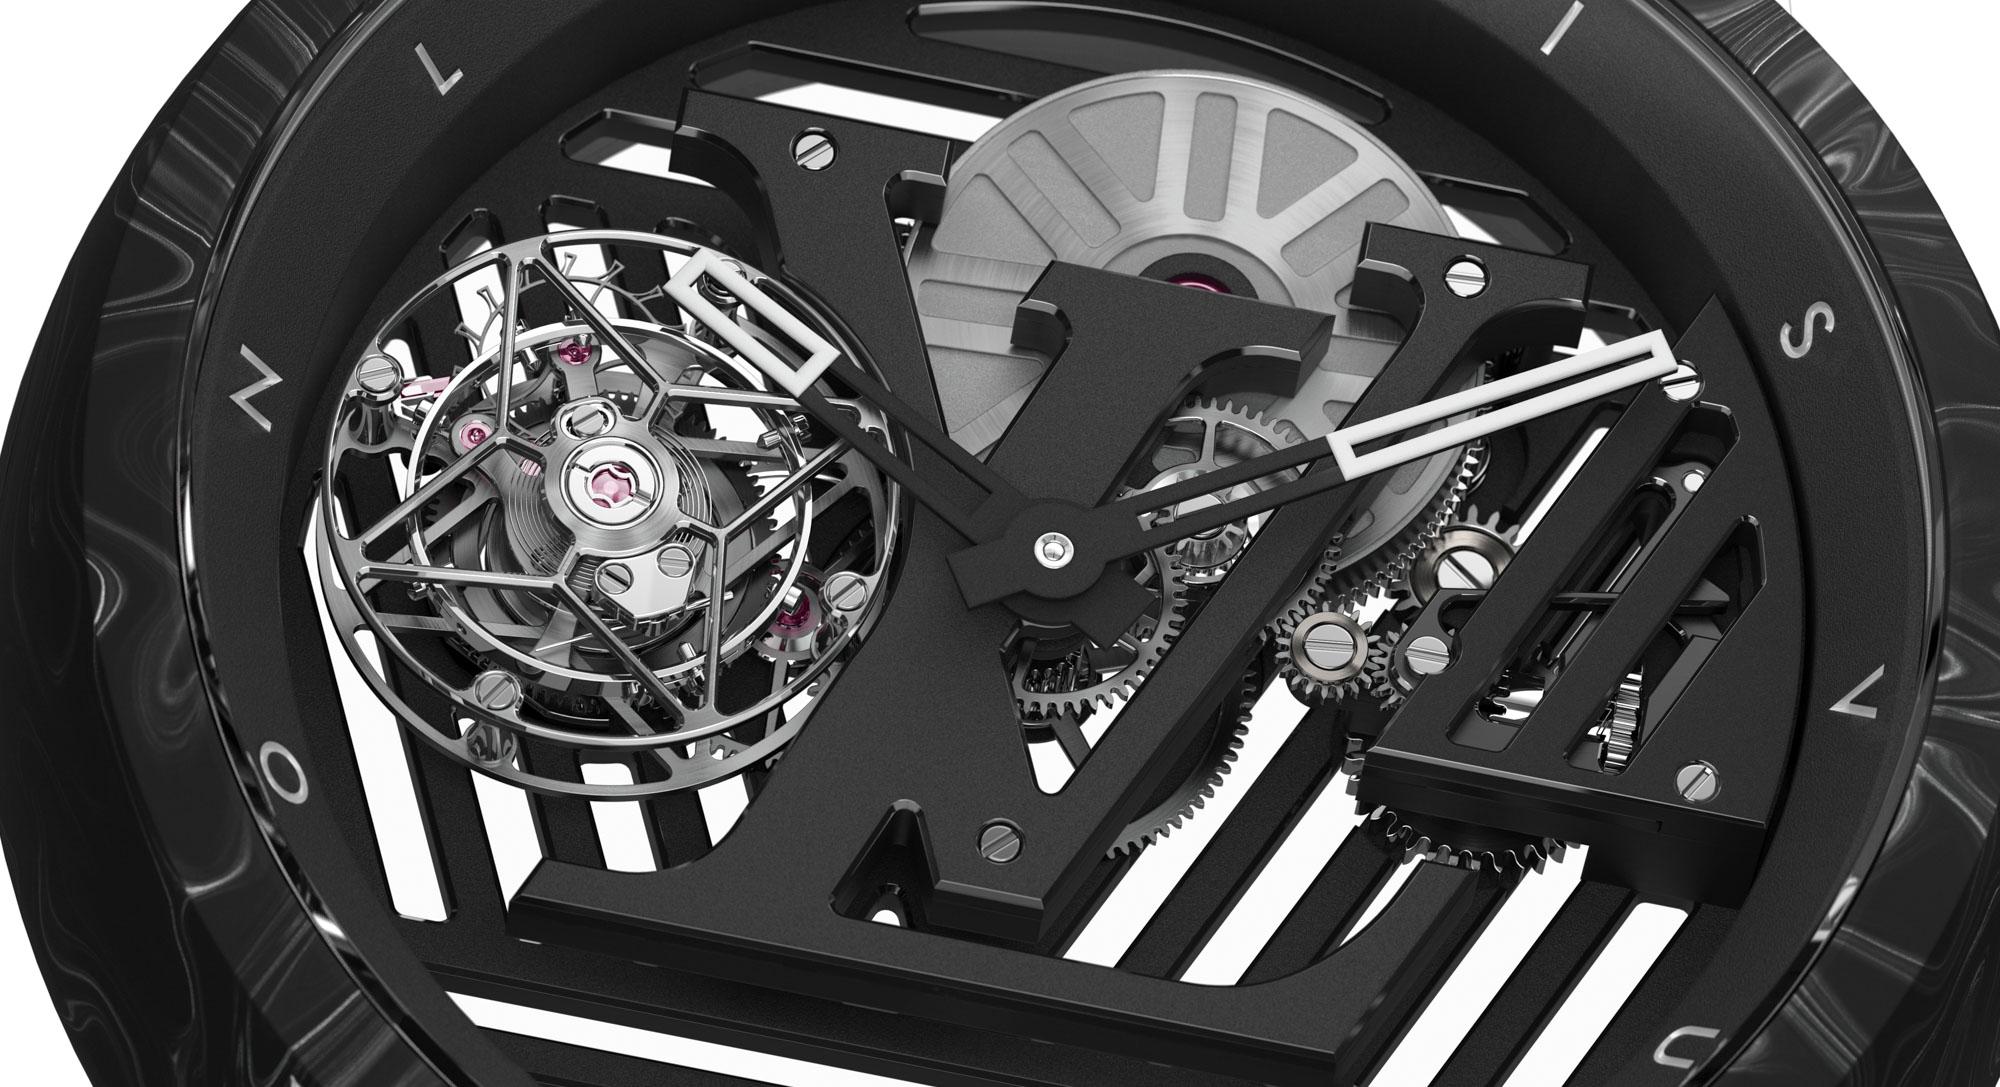 The Louis Vuitton Tambour Curve Flying Tourbillon Is A €280,000 Watch Novelty For 2020 ...